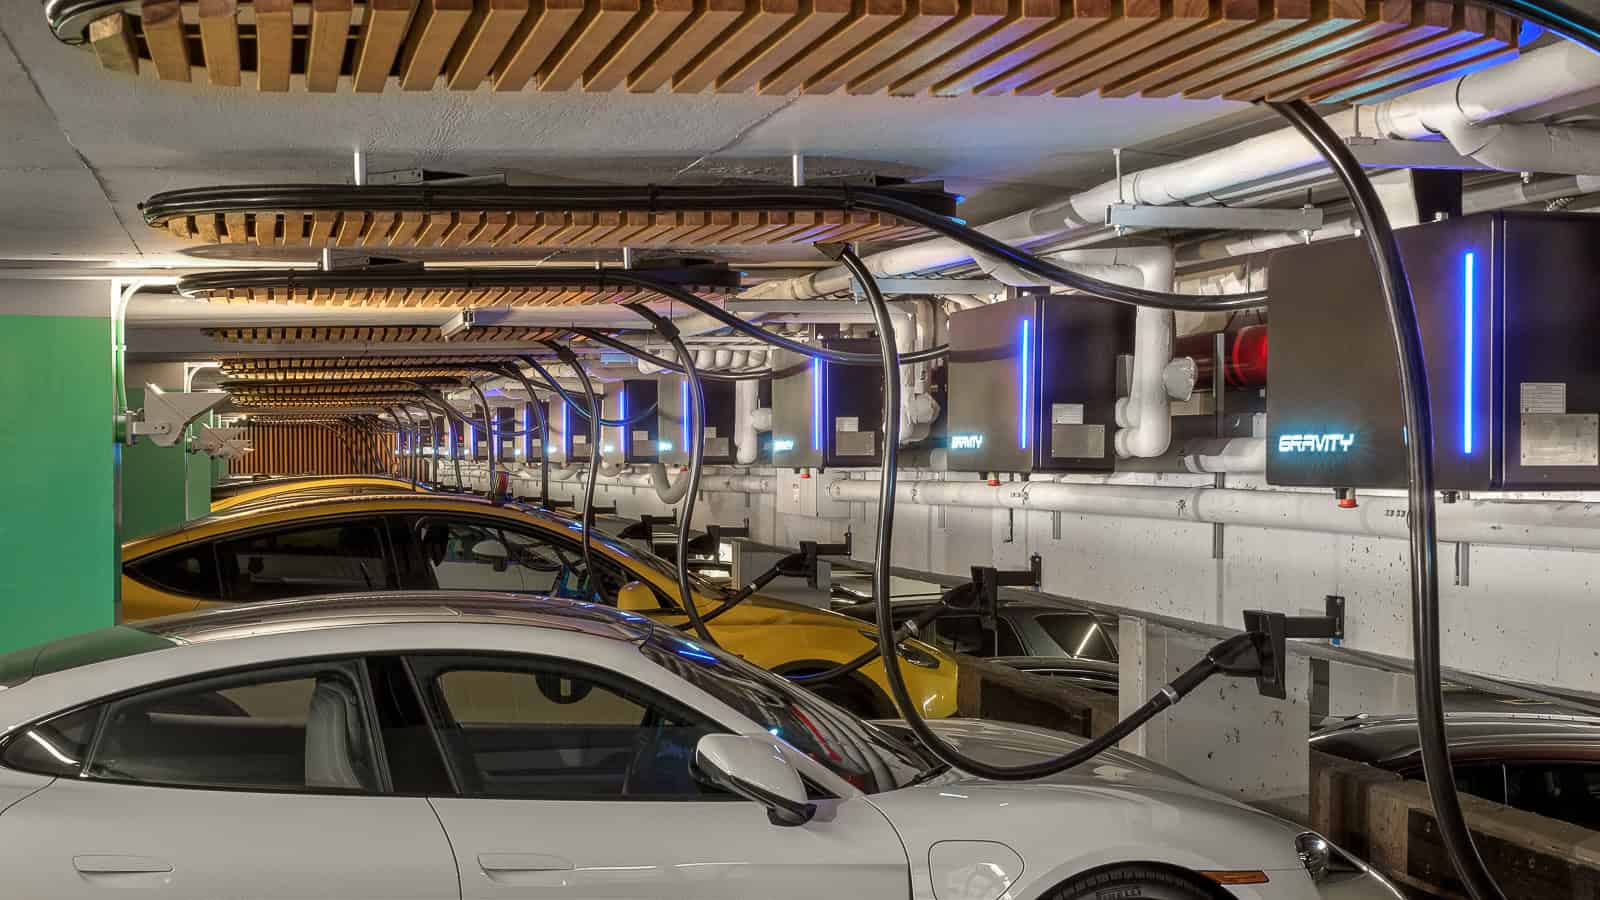 The Gravity EV Charging Center in Midtown Manhattan is Fast Charges 200 Miles in 5 Minutes